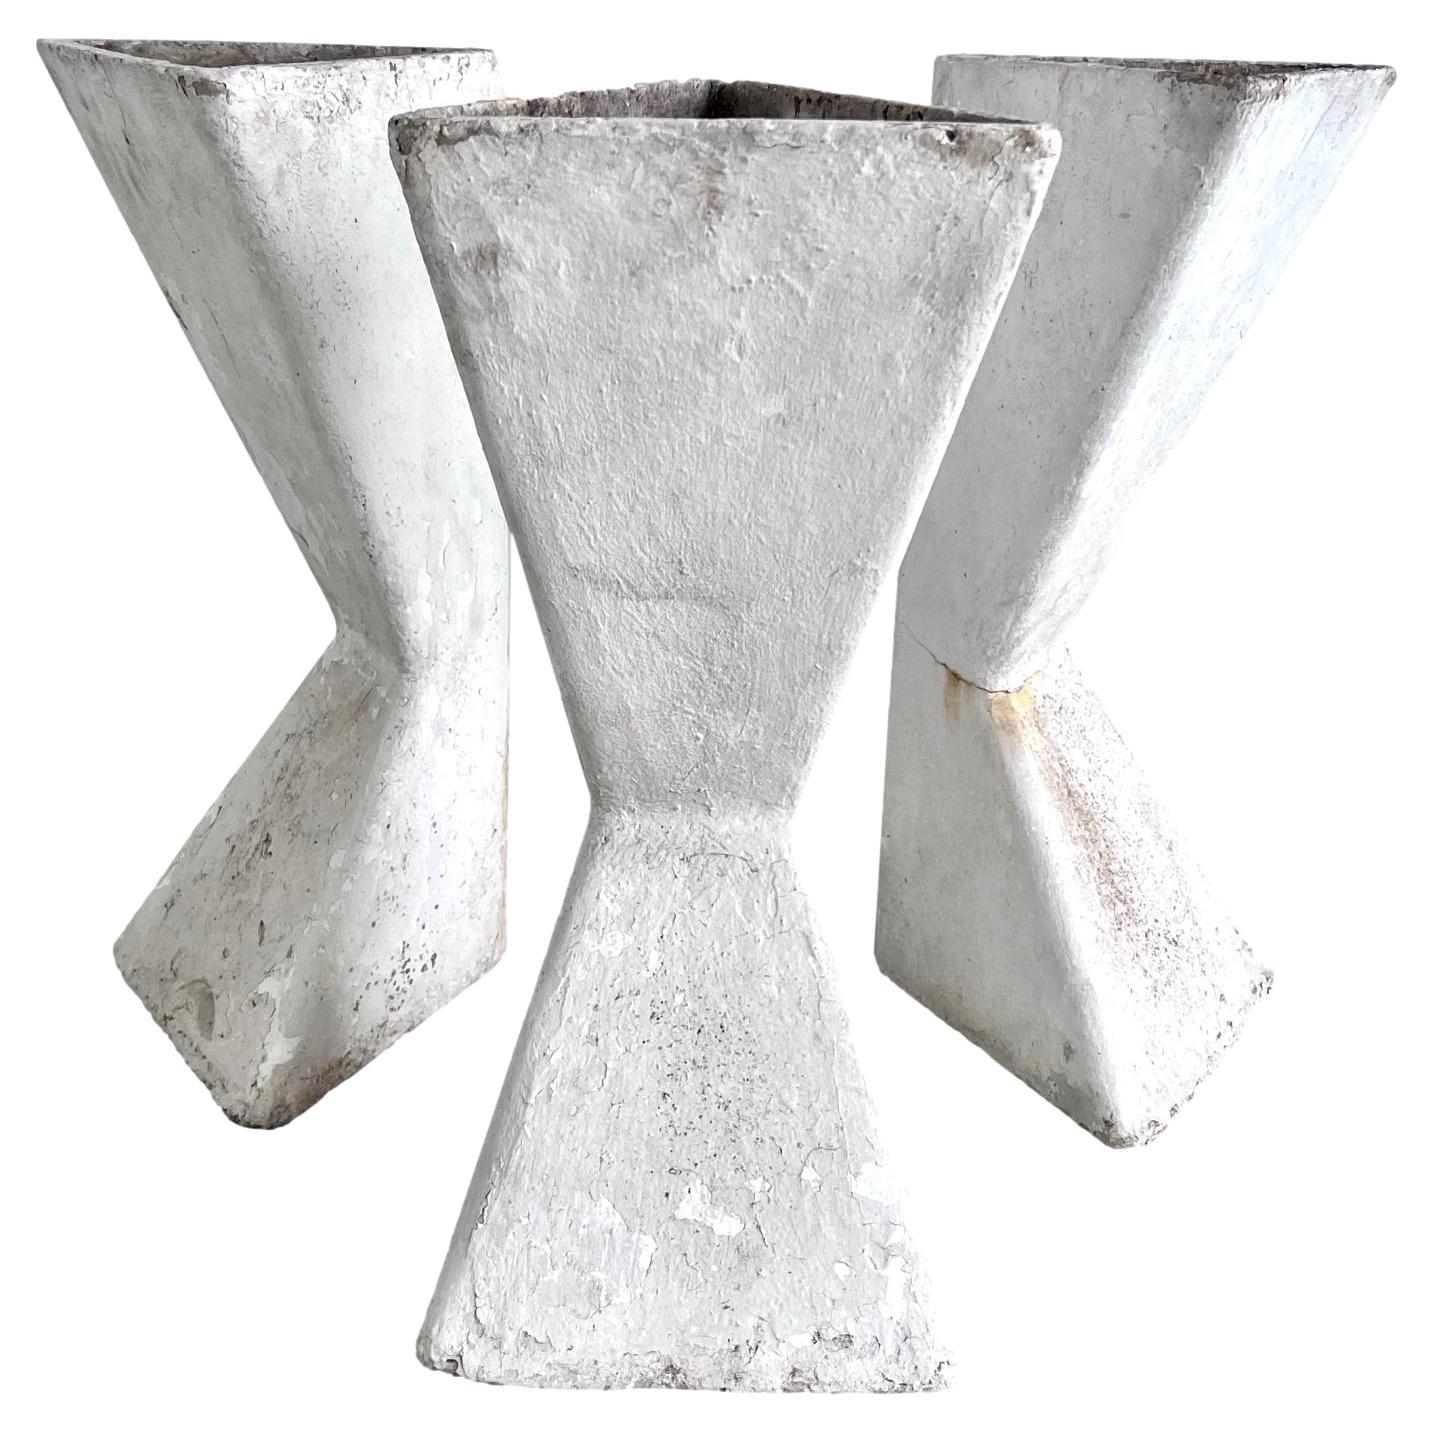 Set of 3 Sculptural Triangular Planters by Willy Guhl, 1960s